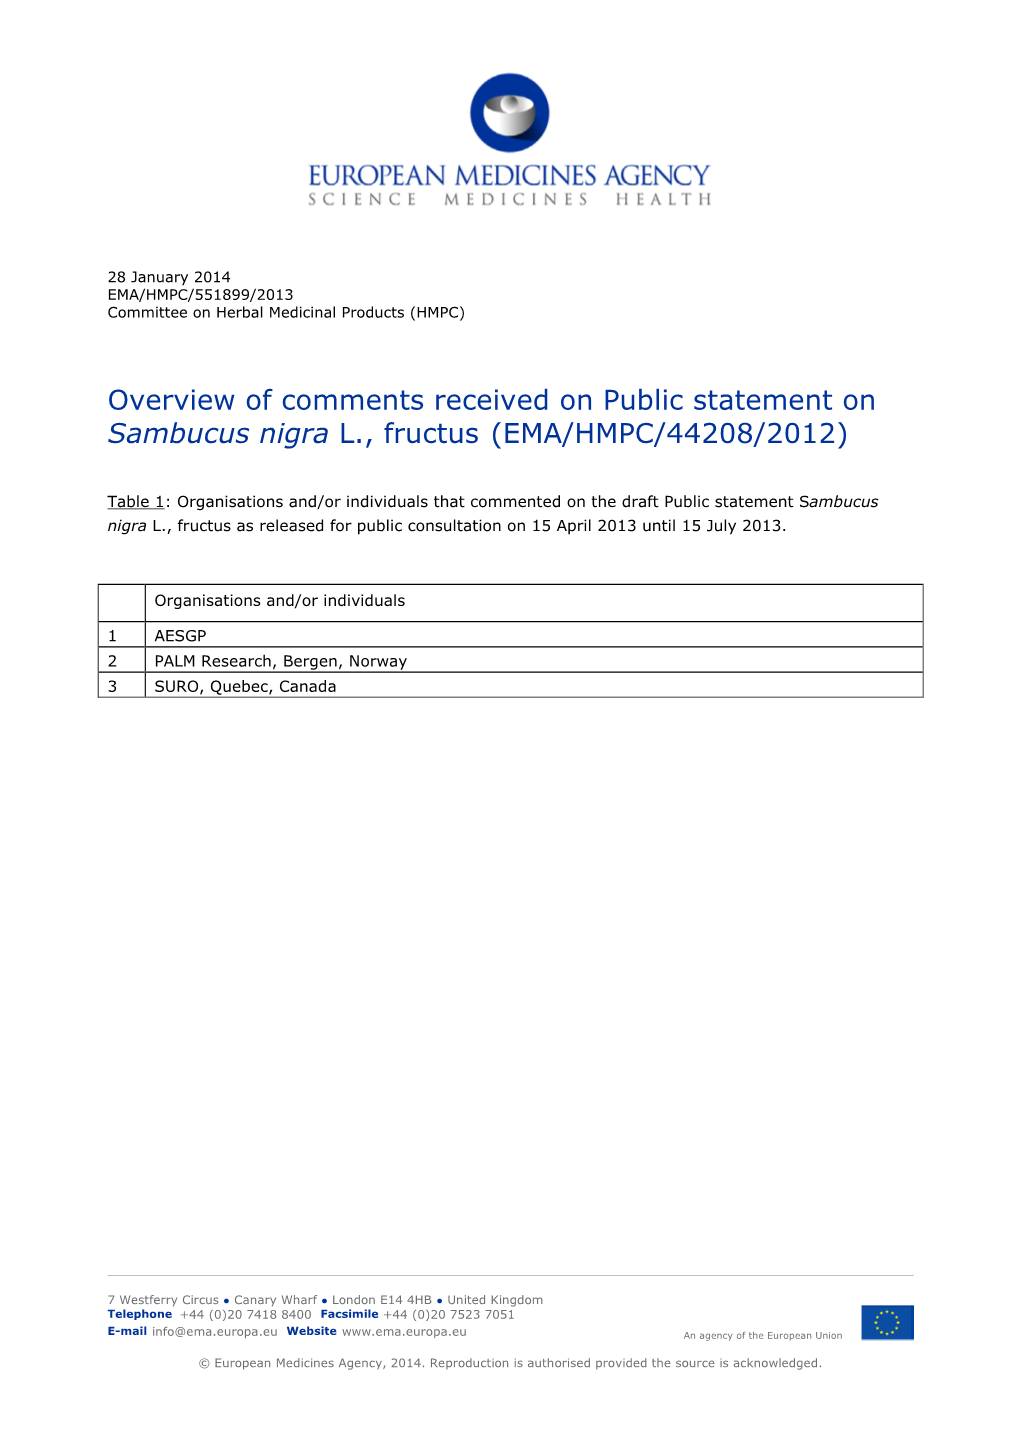 Overview of Comments Received on Public Statement on Sambucus Nigra L., Fructus (EMA/HMPC/44208/2012)